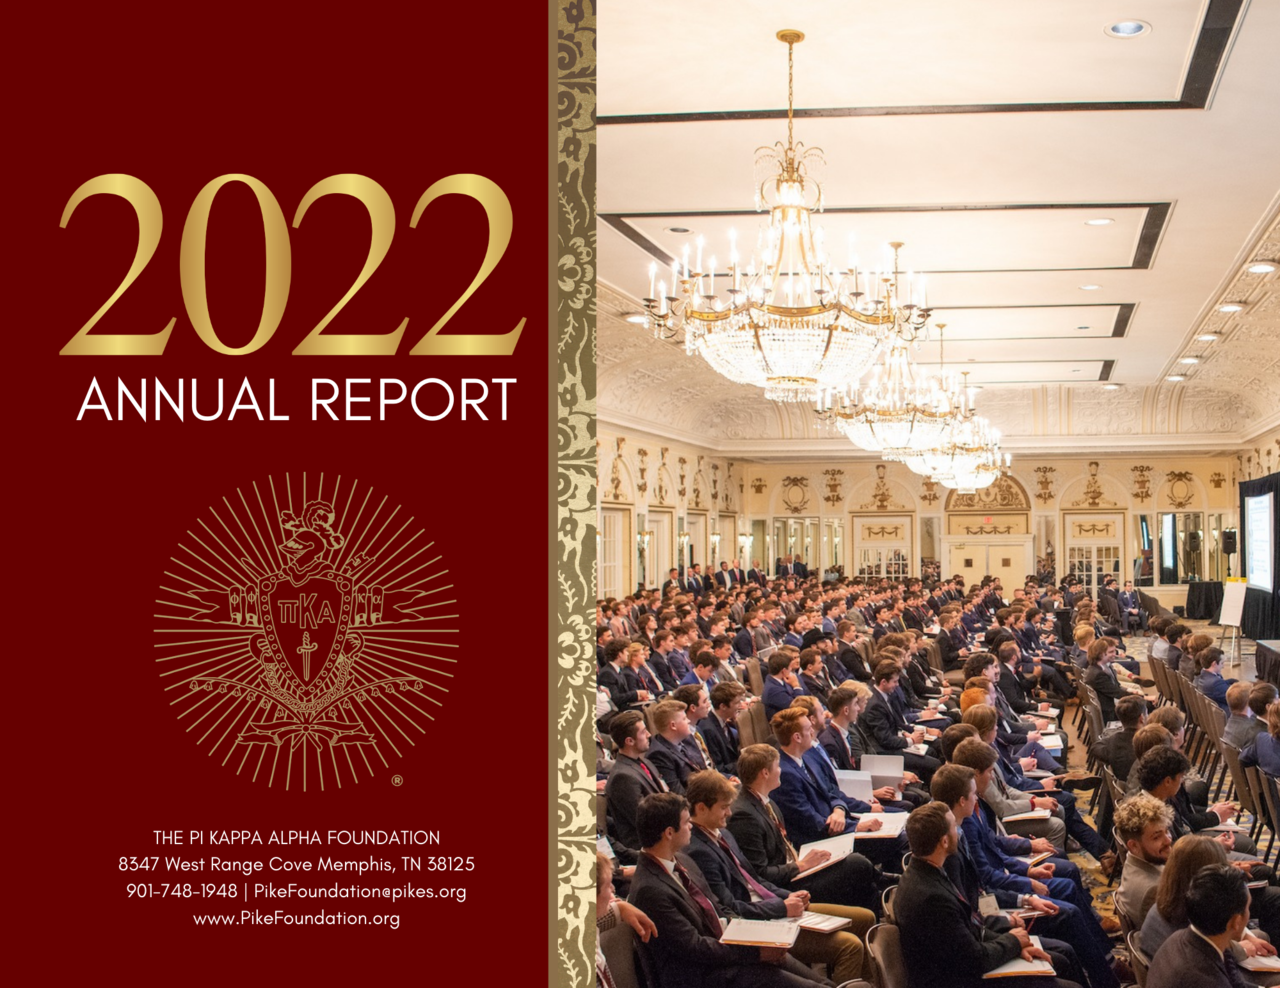 PI KAPPA ALPHA RELEASES 2022 ANNUAL REPORT